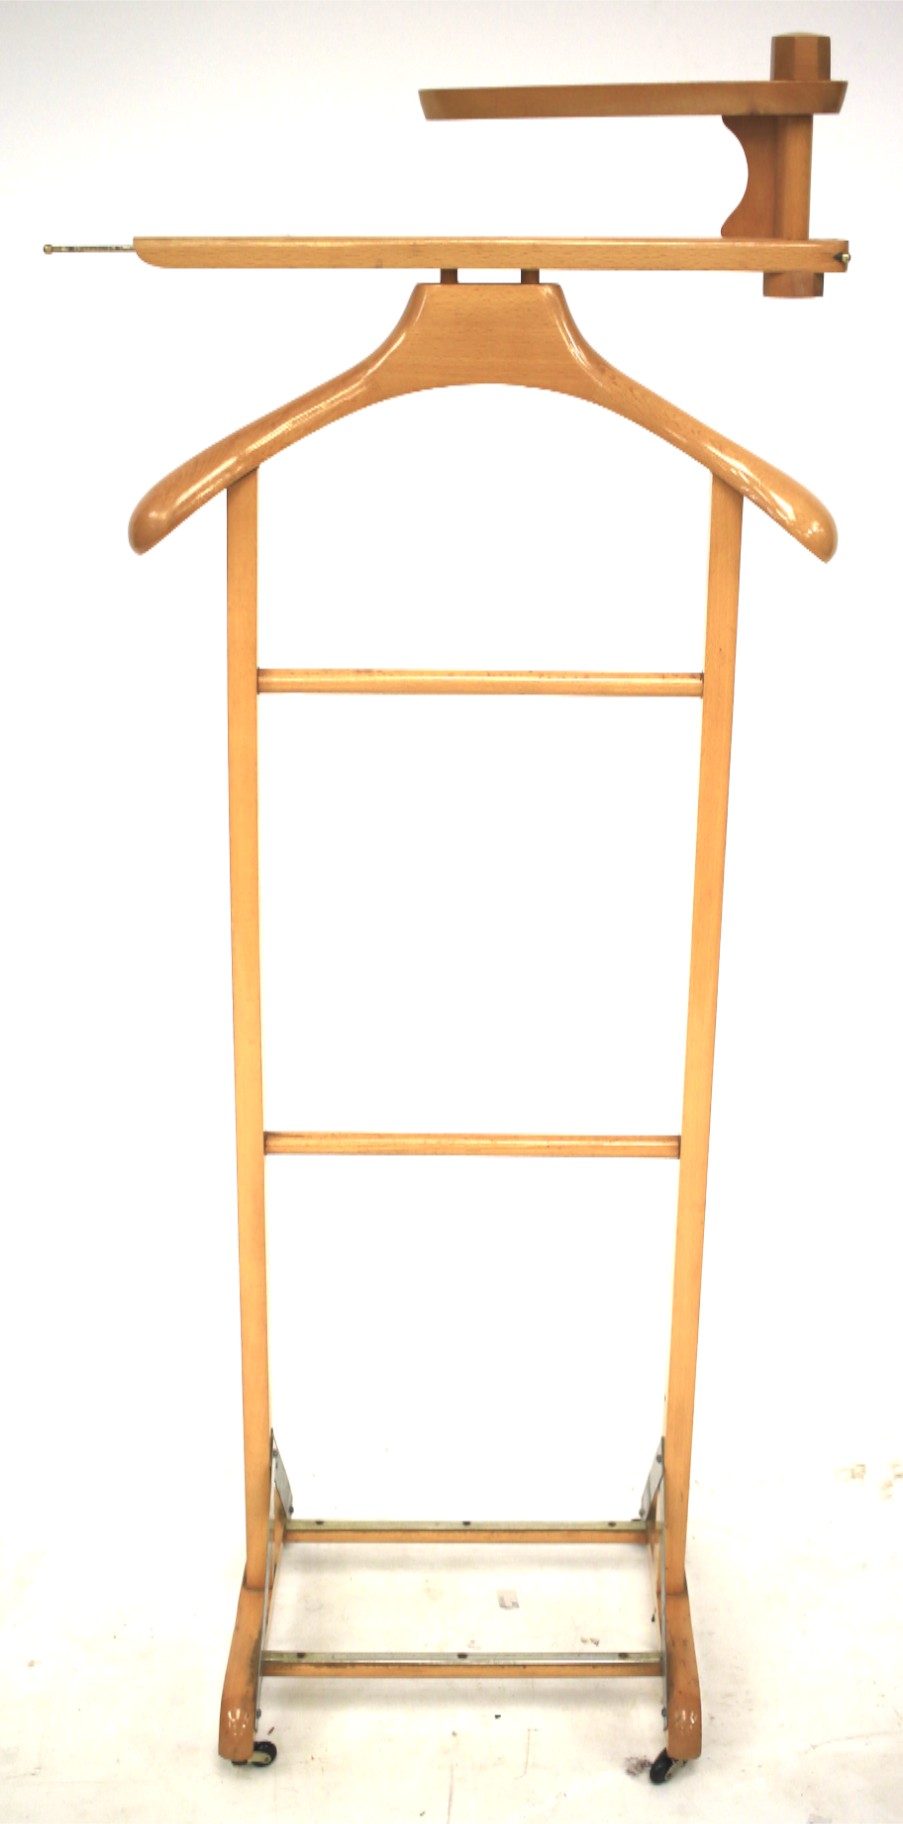 A contemporary wooden gentleman's valet stand.